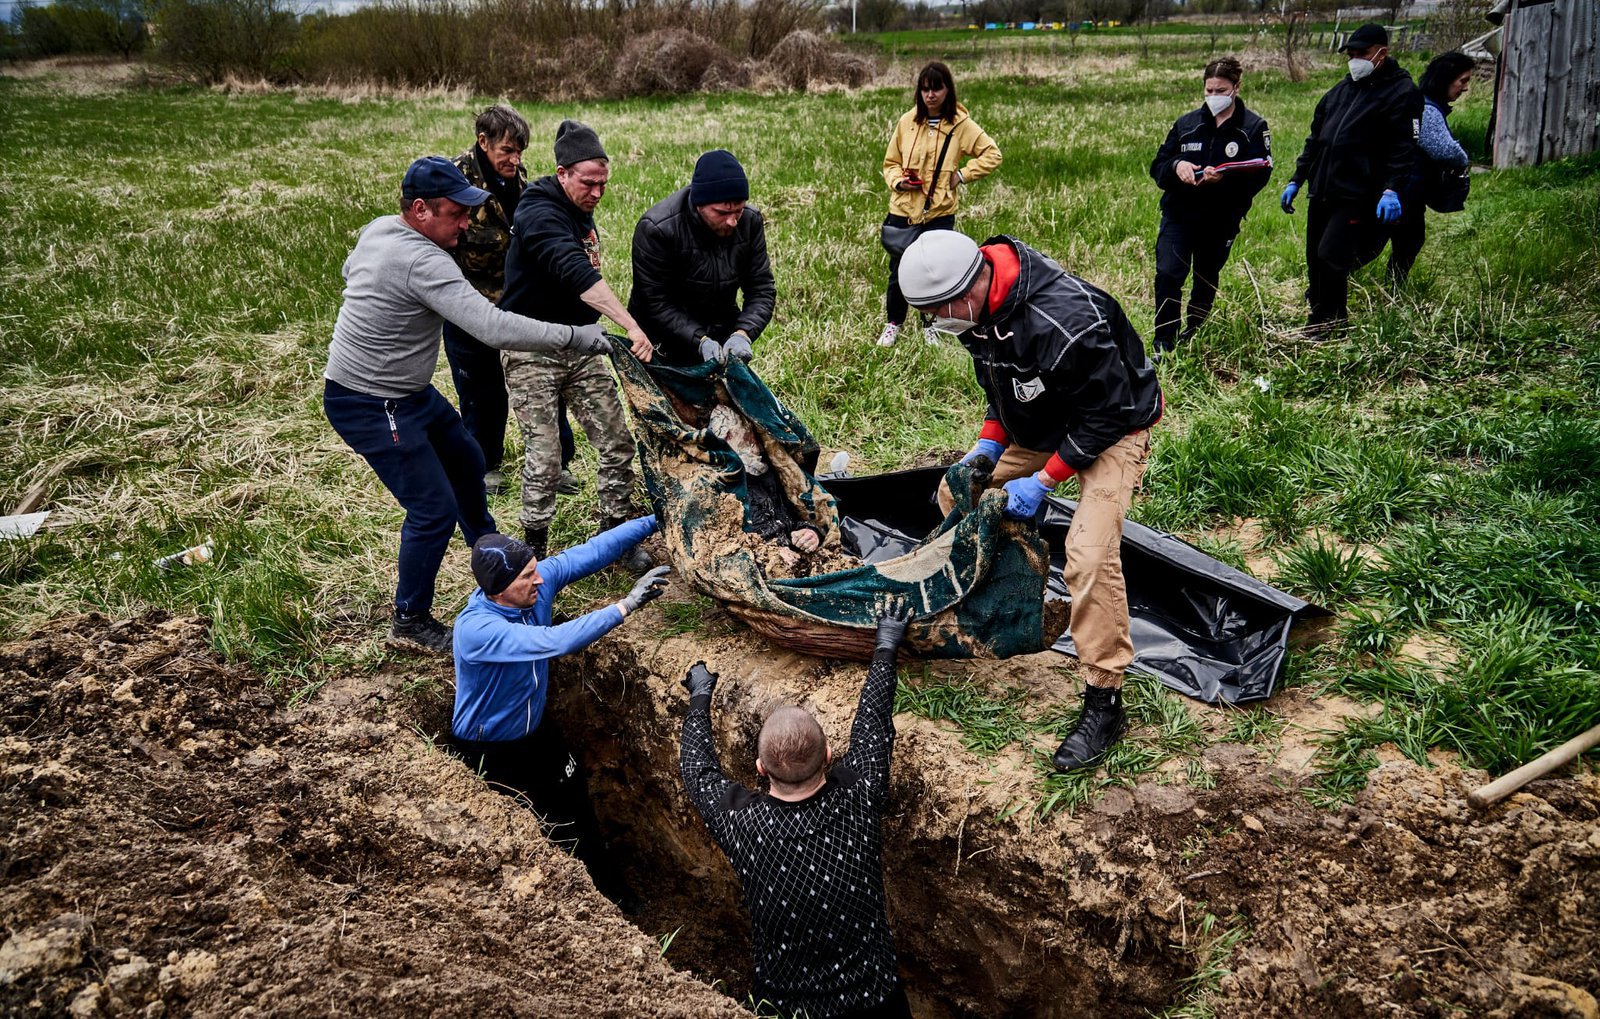 One more grave in Borodyanka — the body of a man shot by the Russians is being exhumed from his own garden